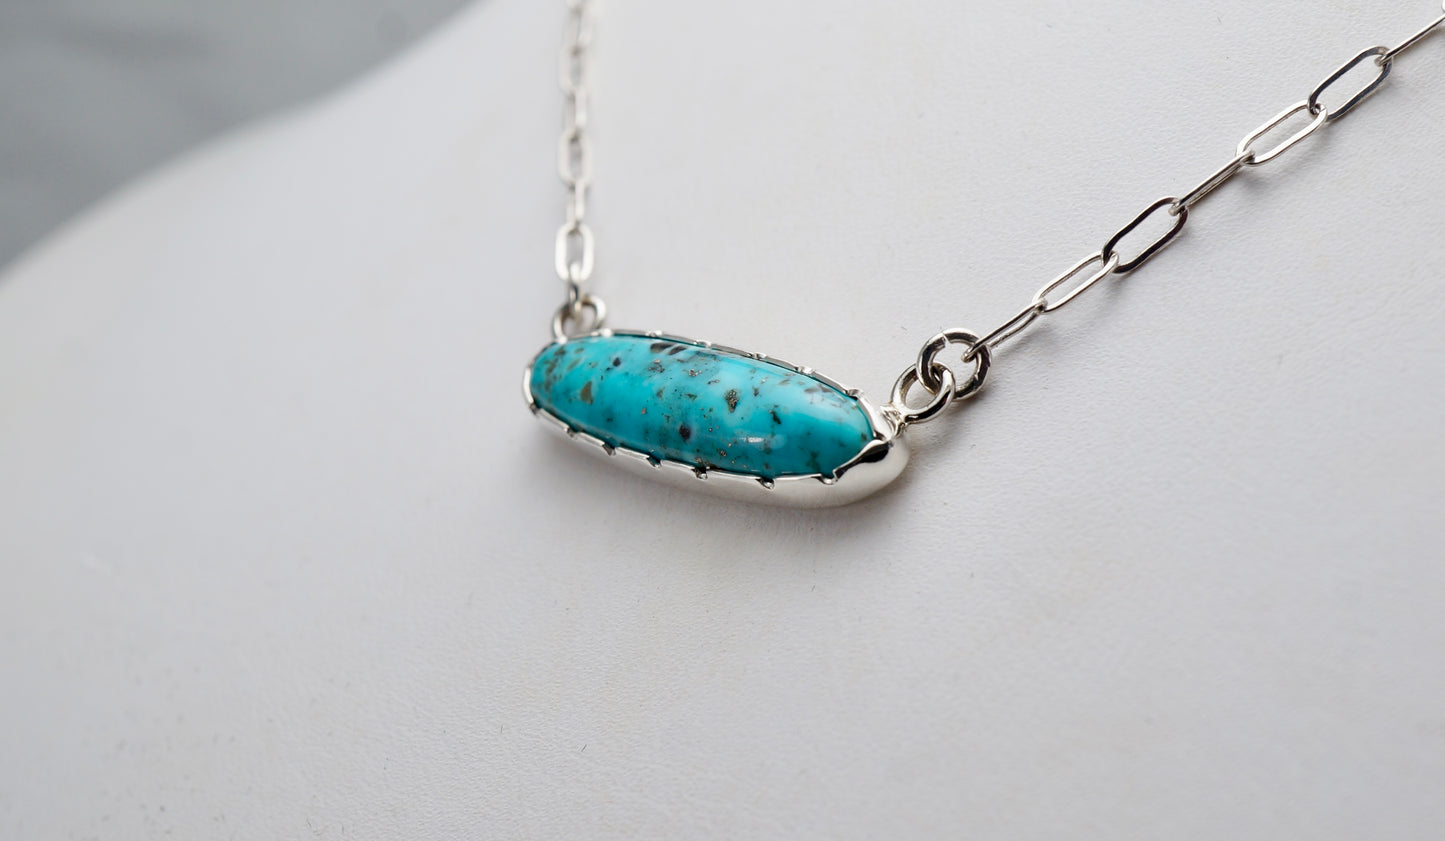 Authentic Turquoise Necklace Set in Sterling Silver